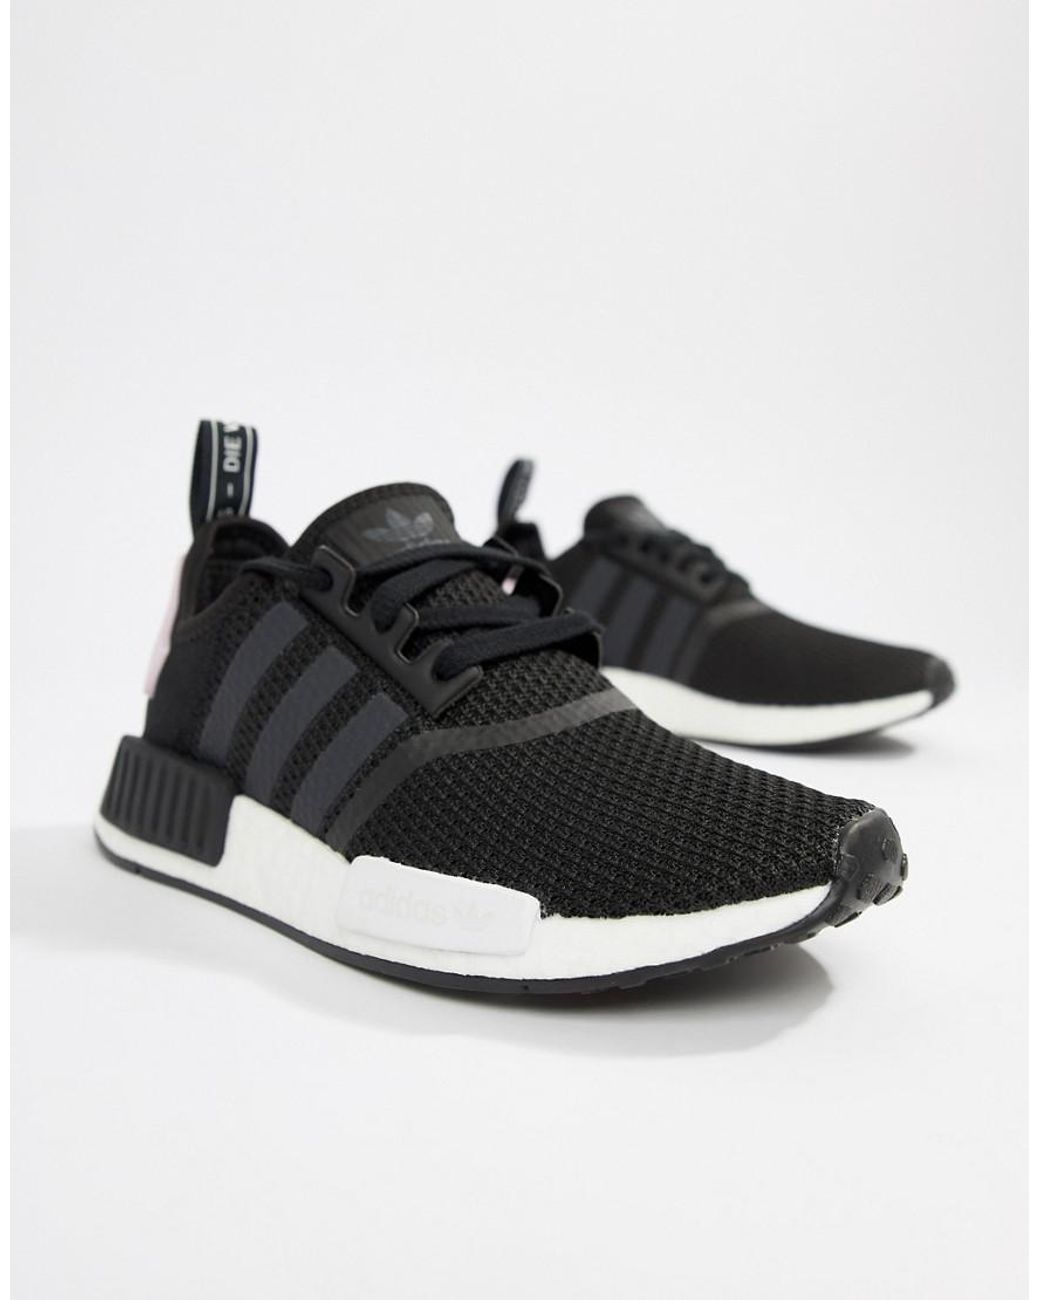 adidas Nmd Sneakers In Black And Pink |